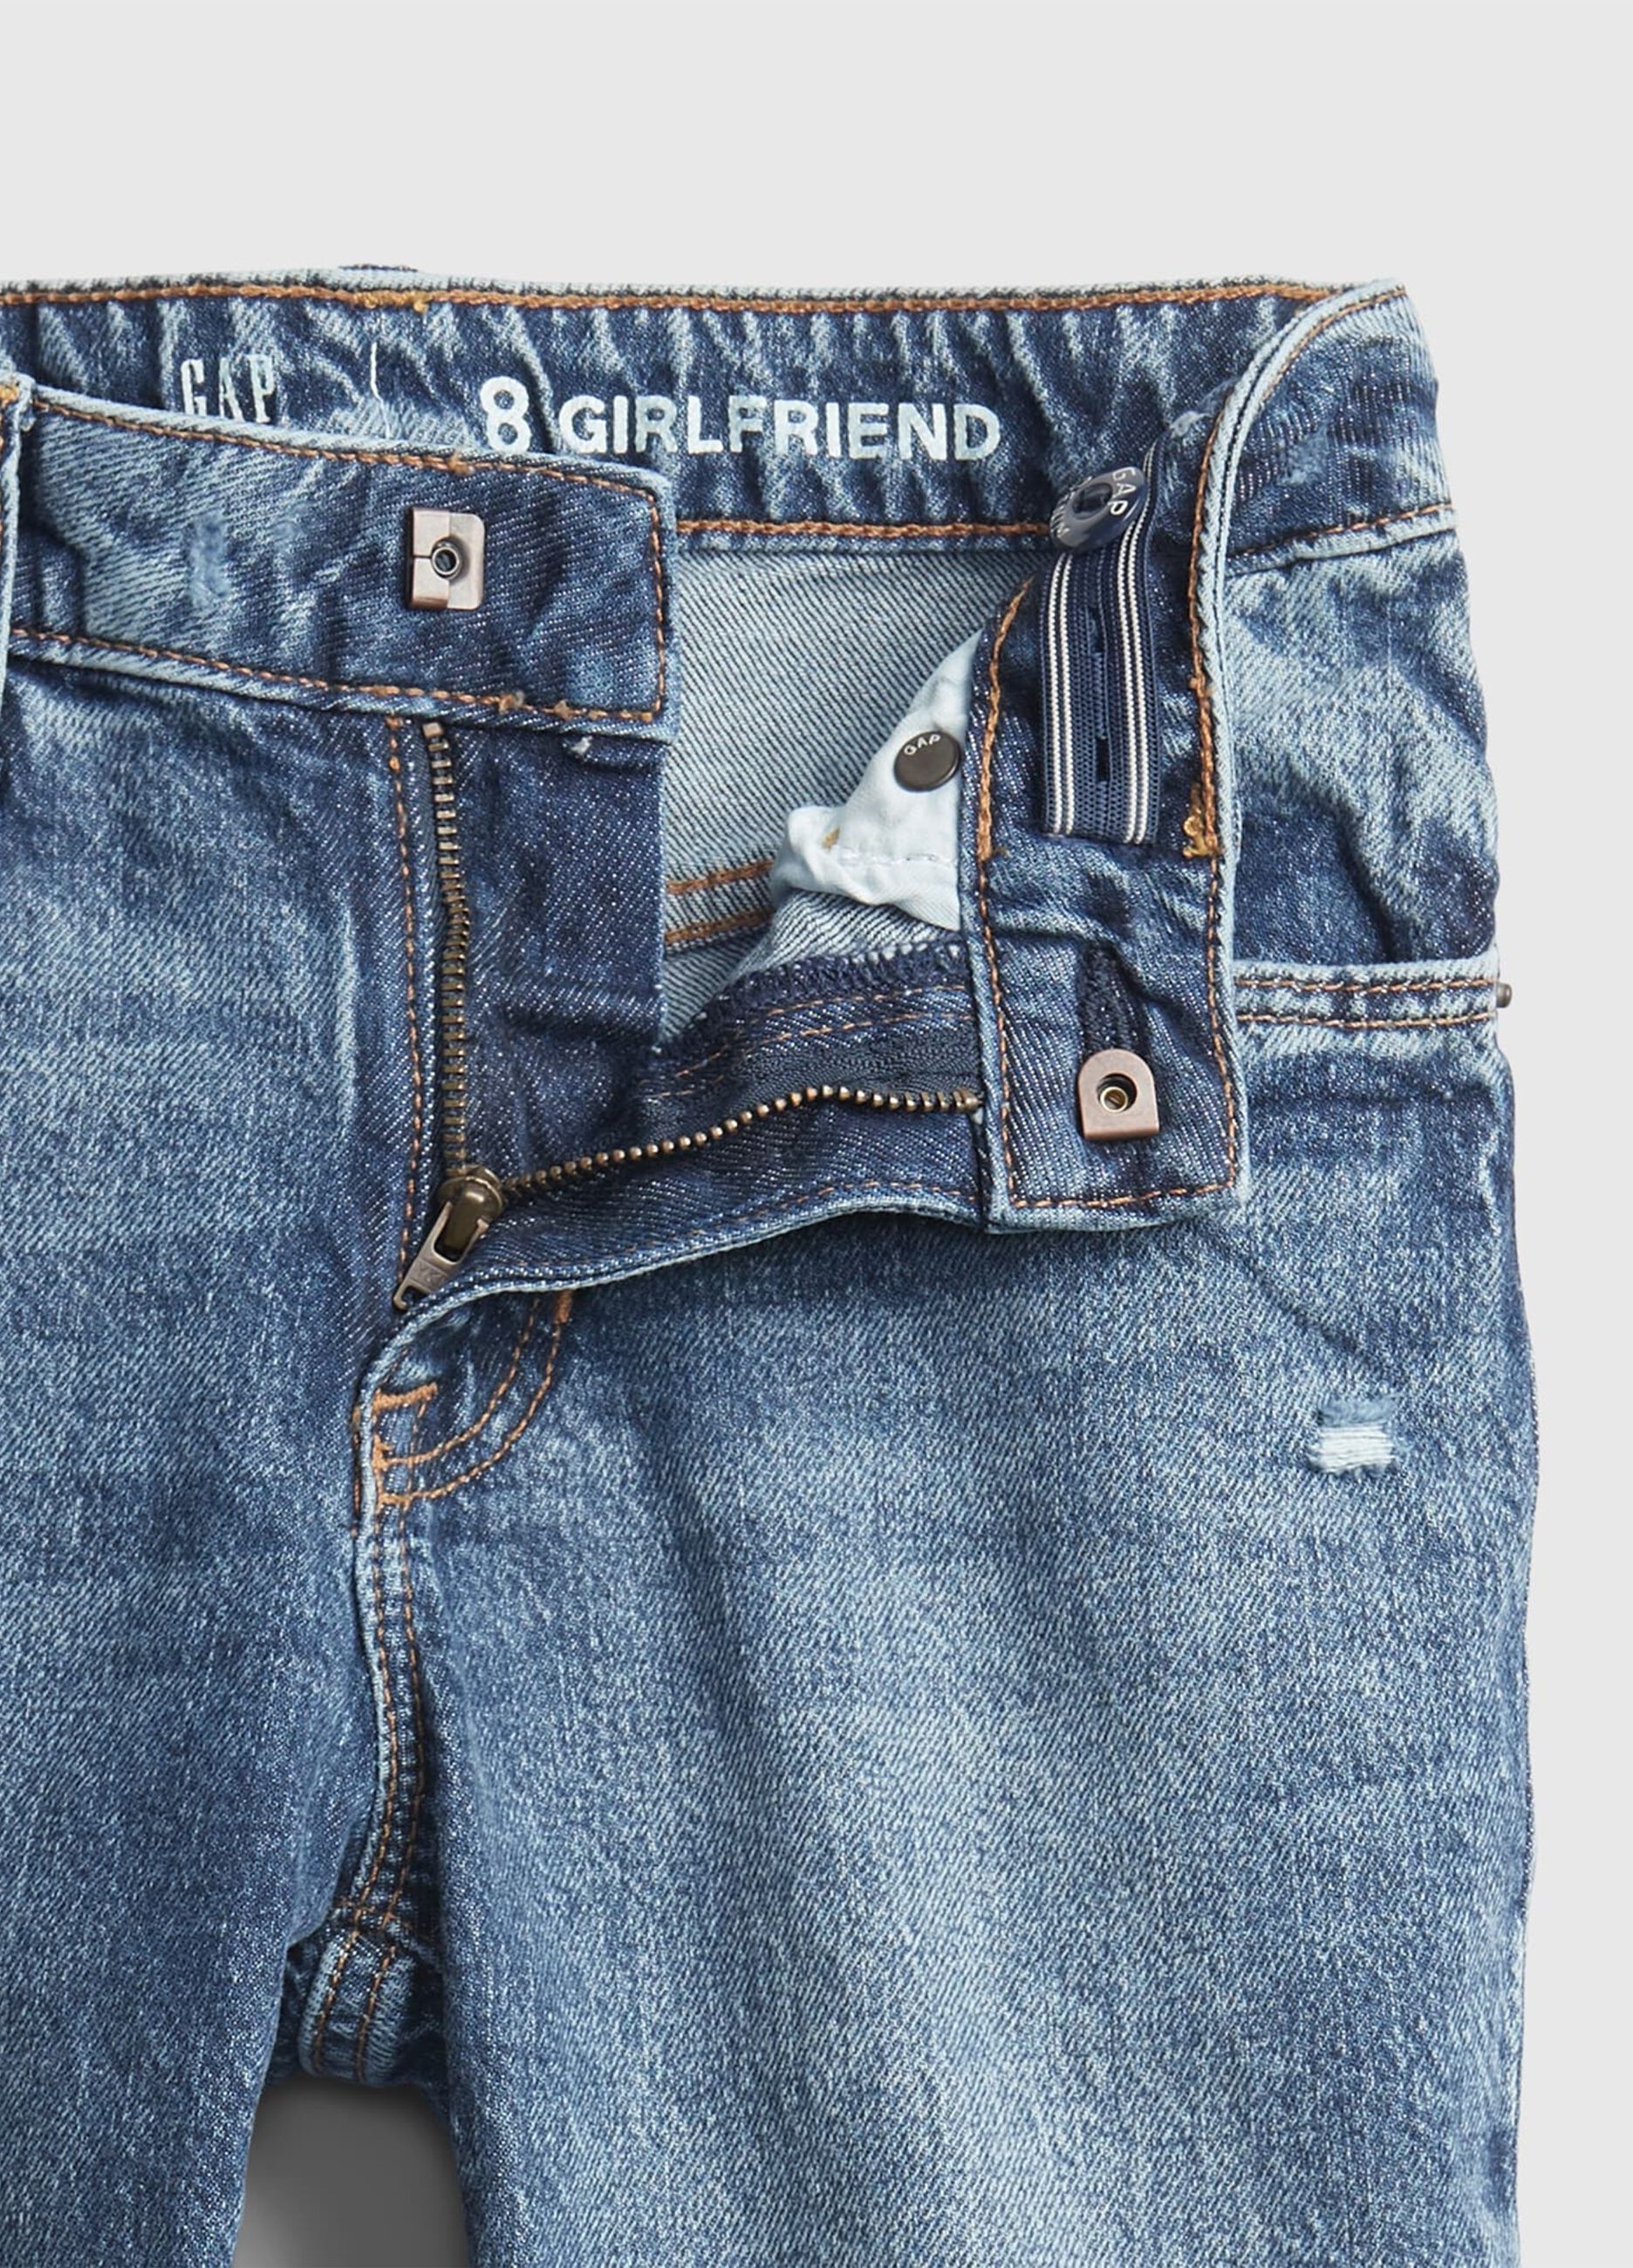 Girlfriend jeans with abrasions